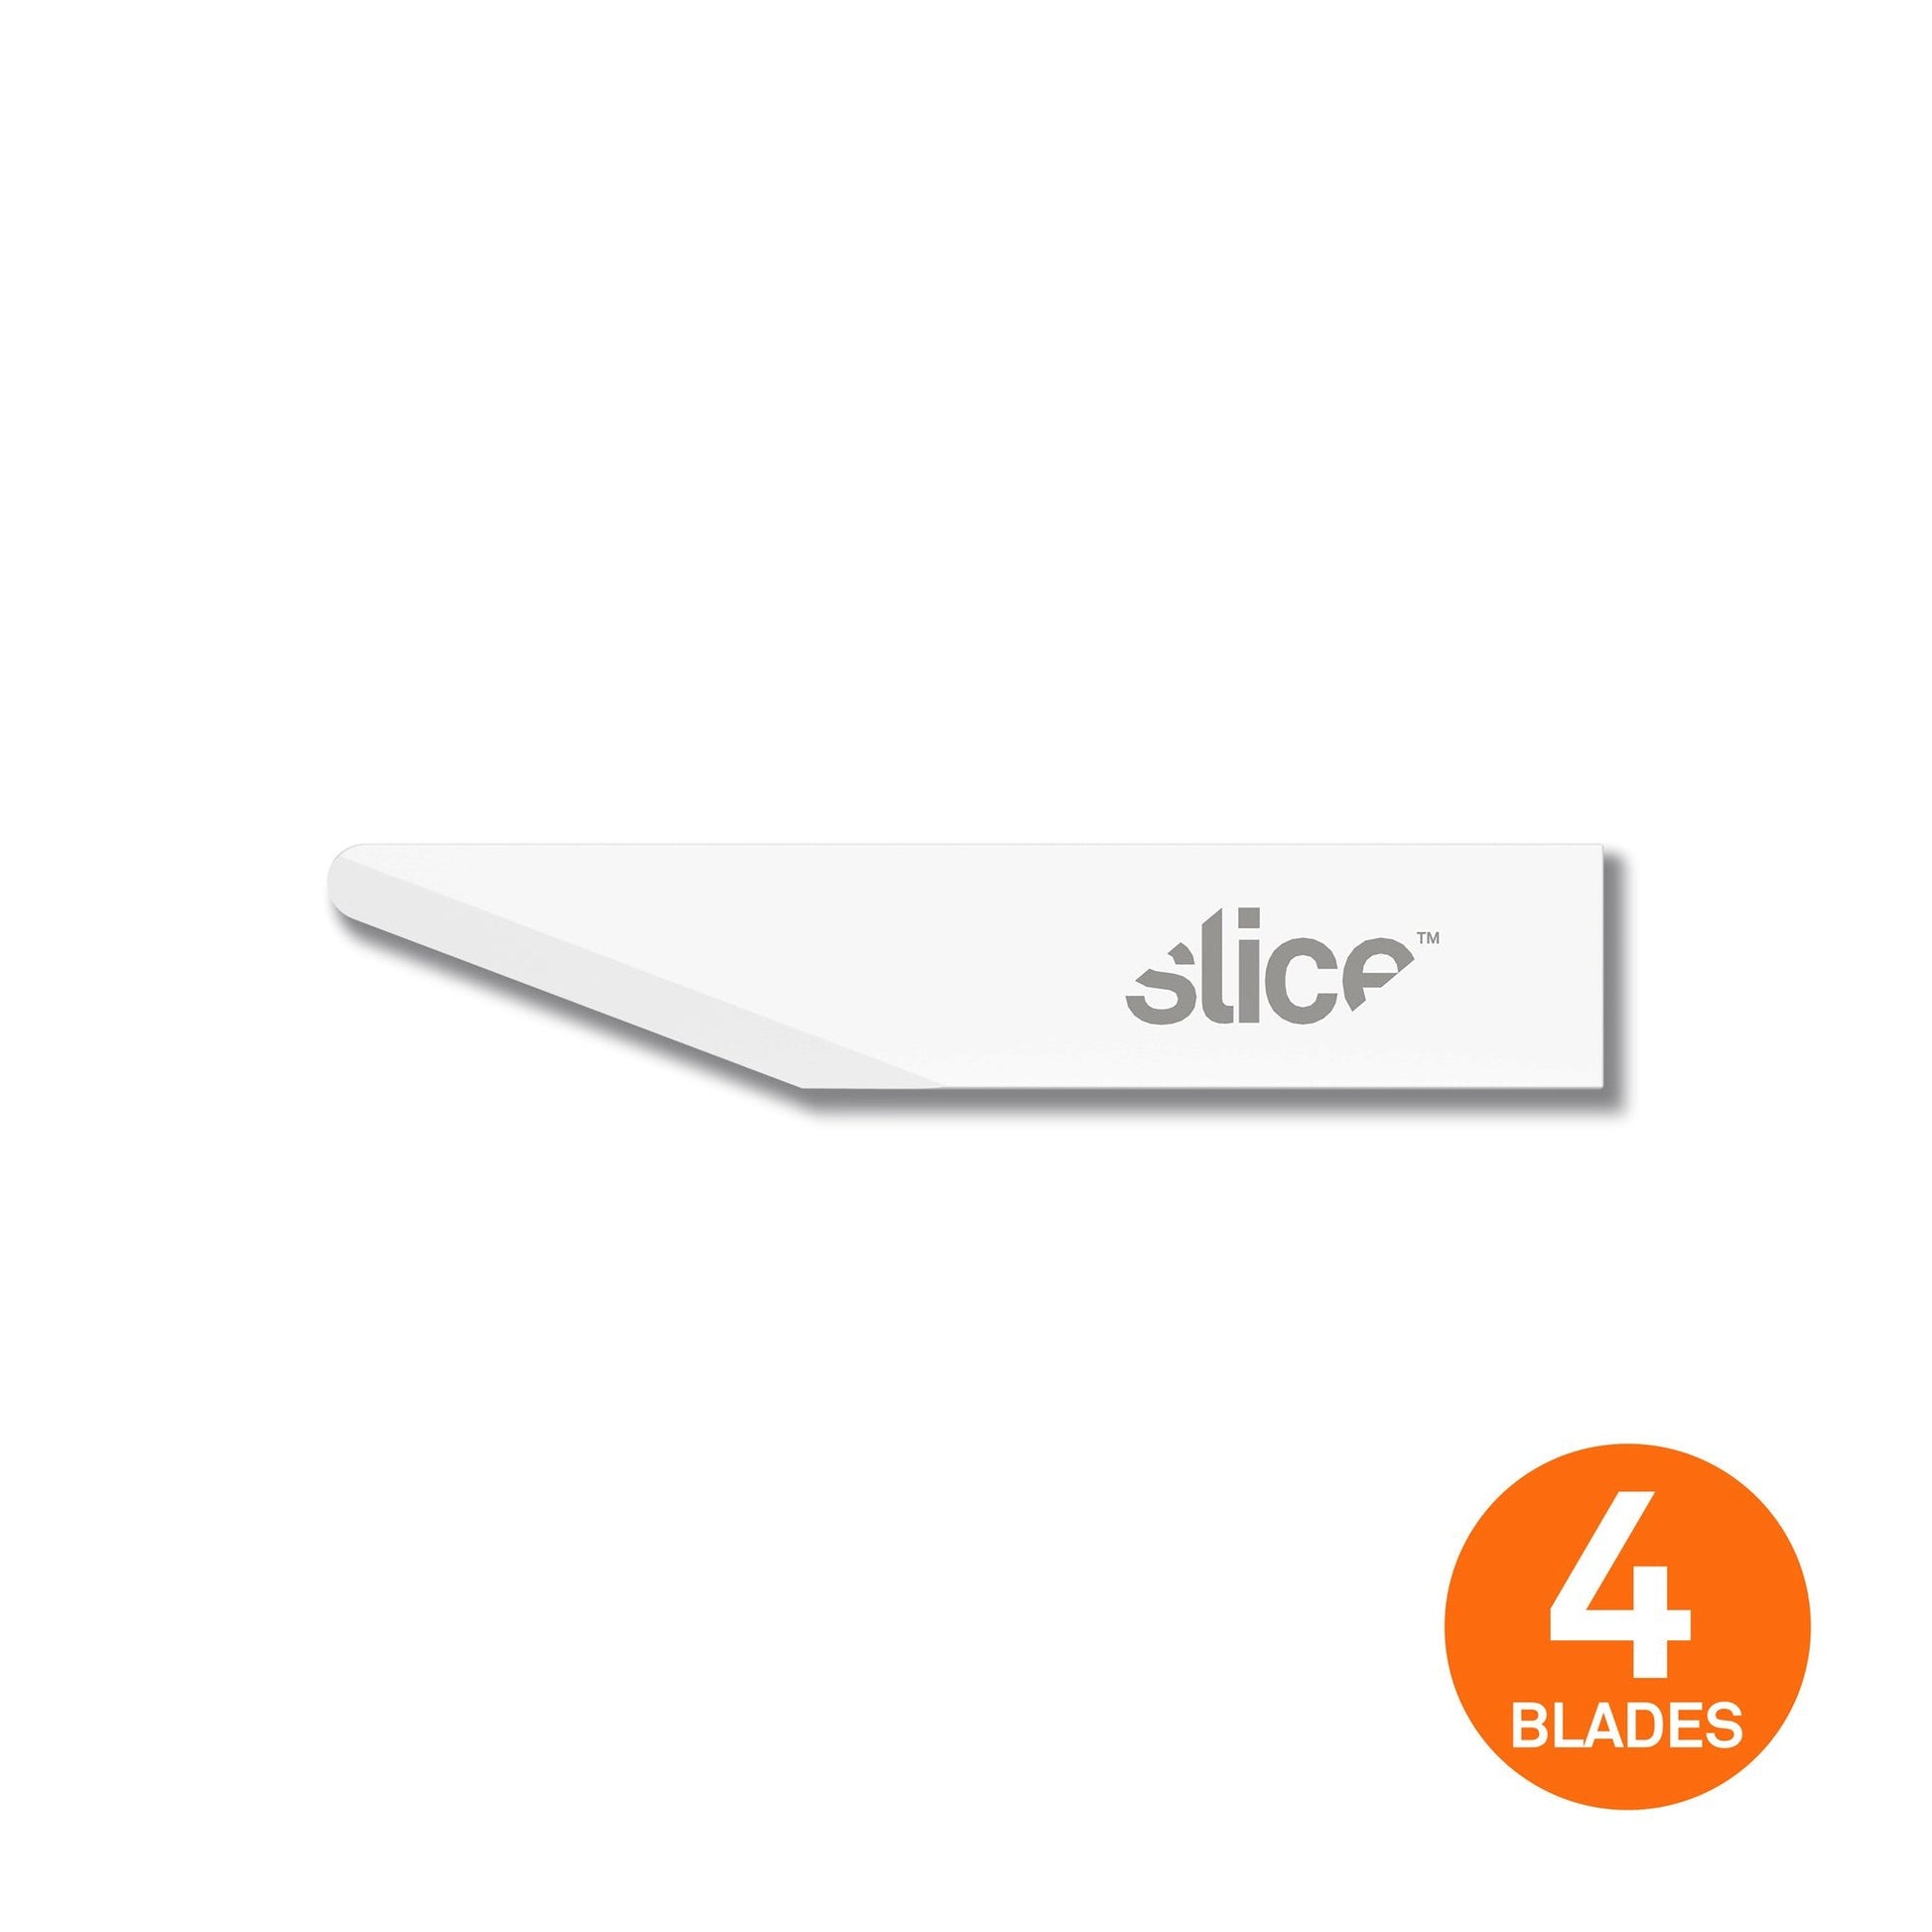 The Slice® 10518 Craft Blade with a straight edge and rounded tip